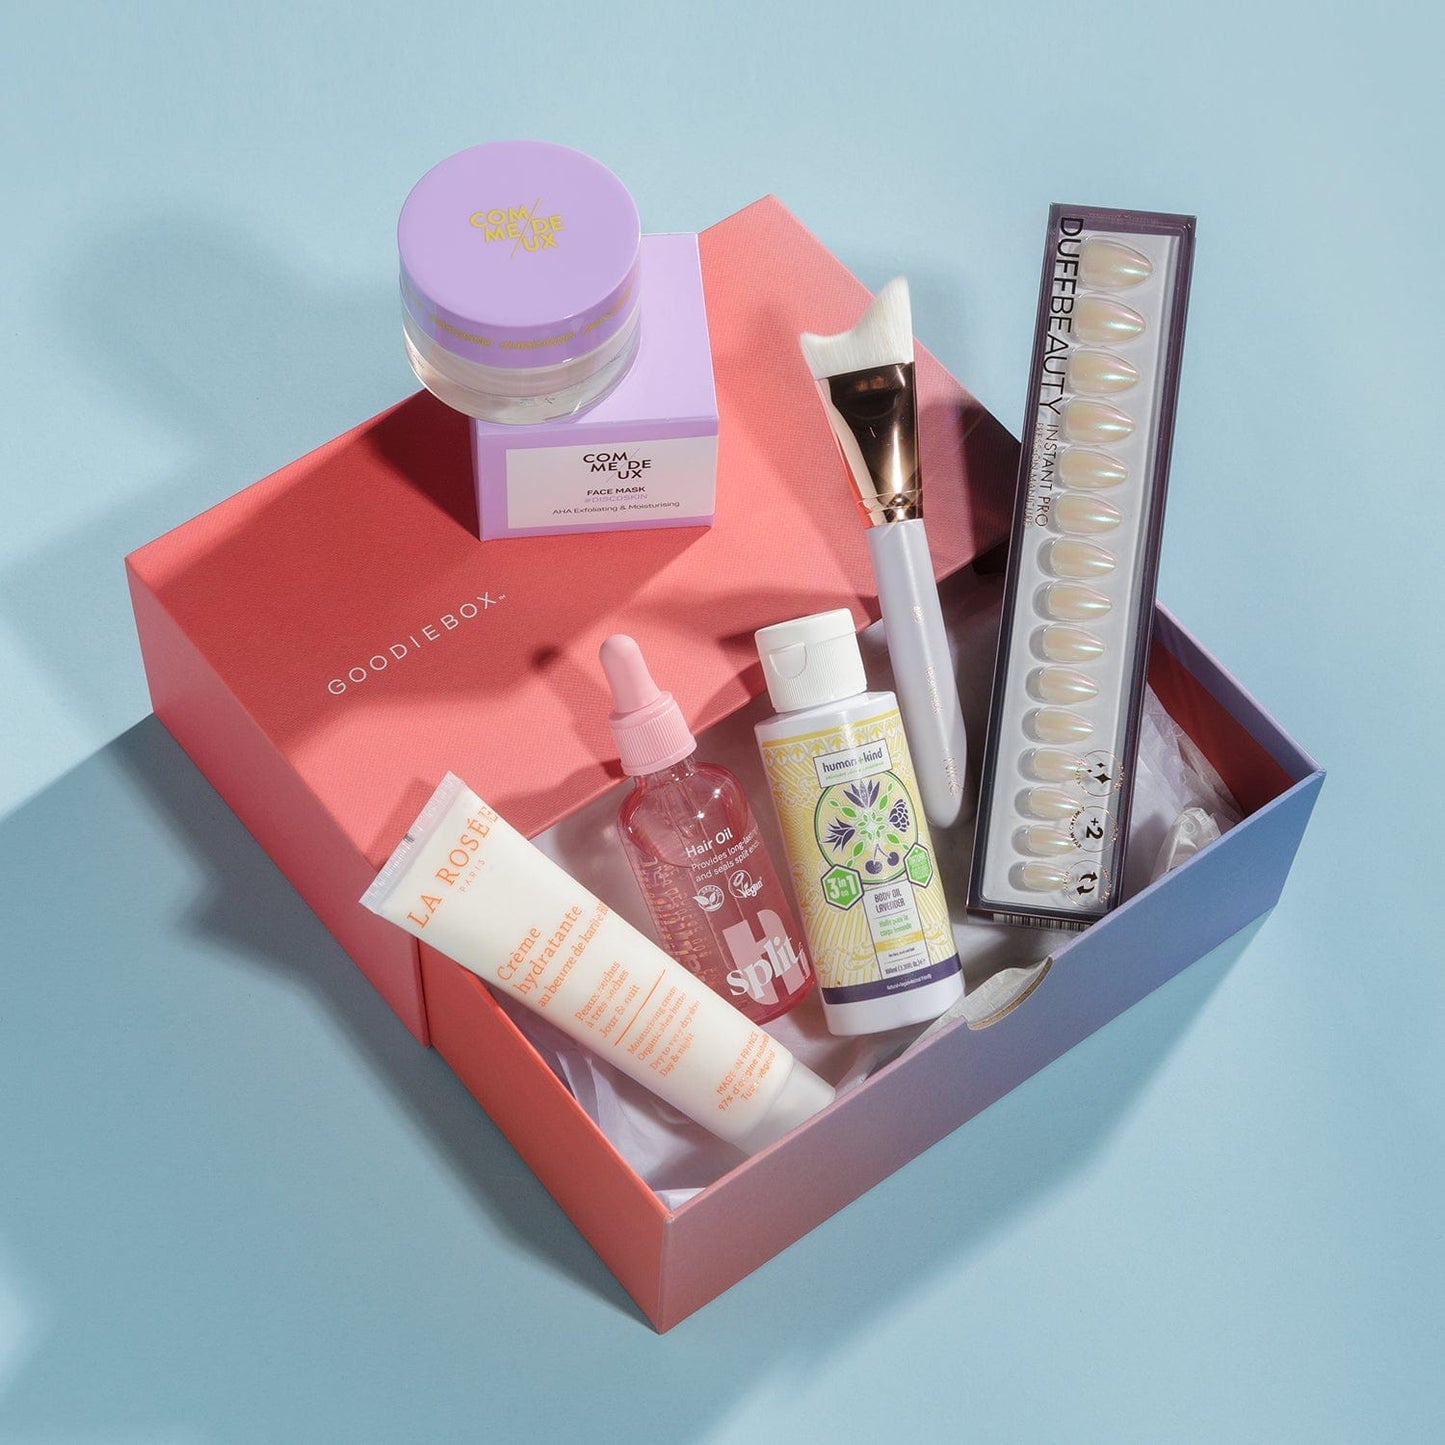 The 'Radiance Boost' Box